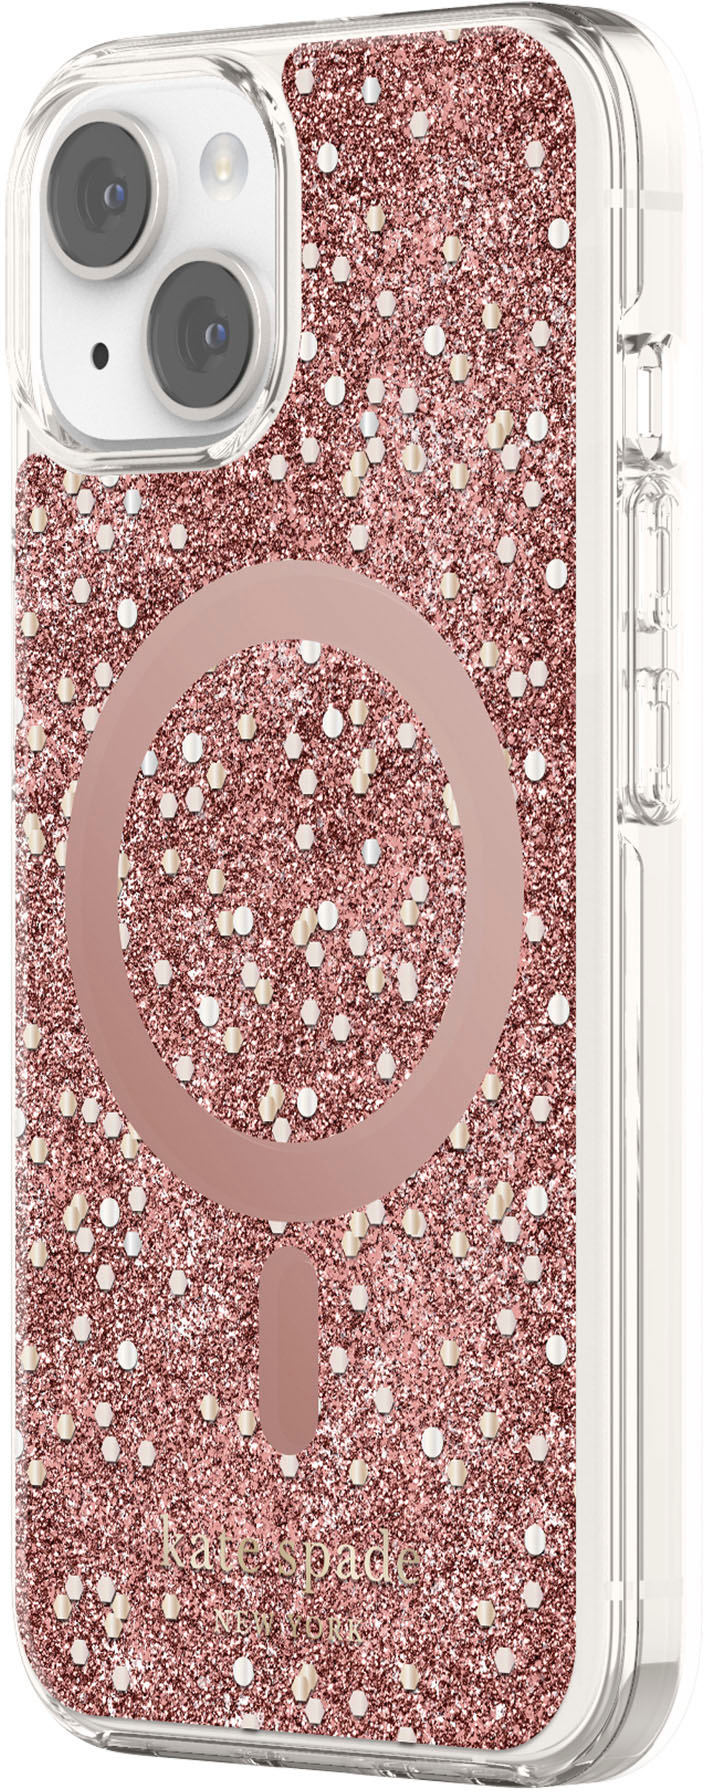 Kate Spade New York Patisserie Desert Glitter Printed TPU Phone Case for iPhone 13 Clear Multi One Size